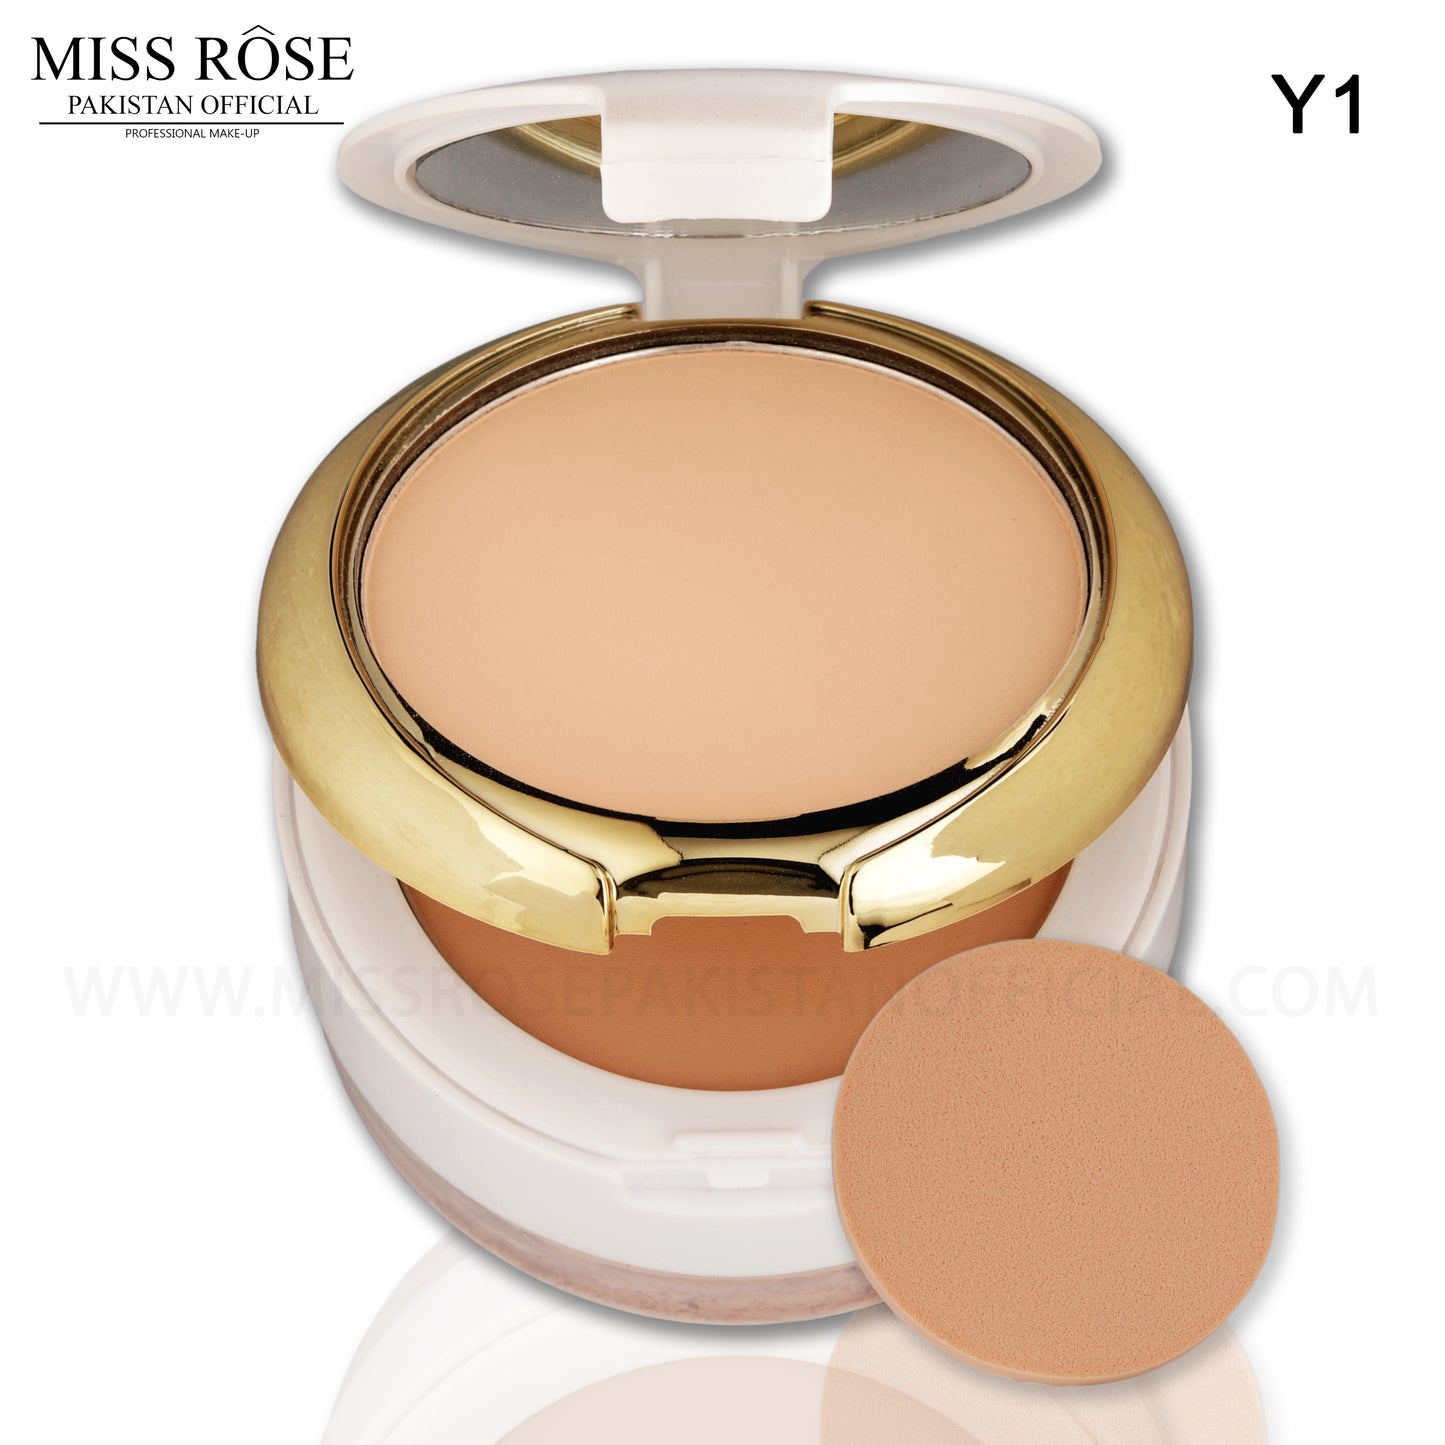 3D Compact and Loose Powder